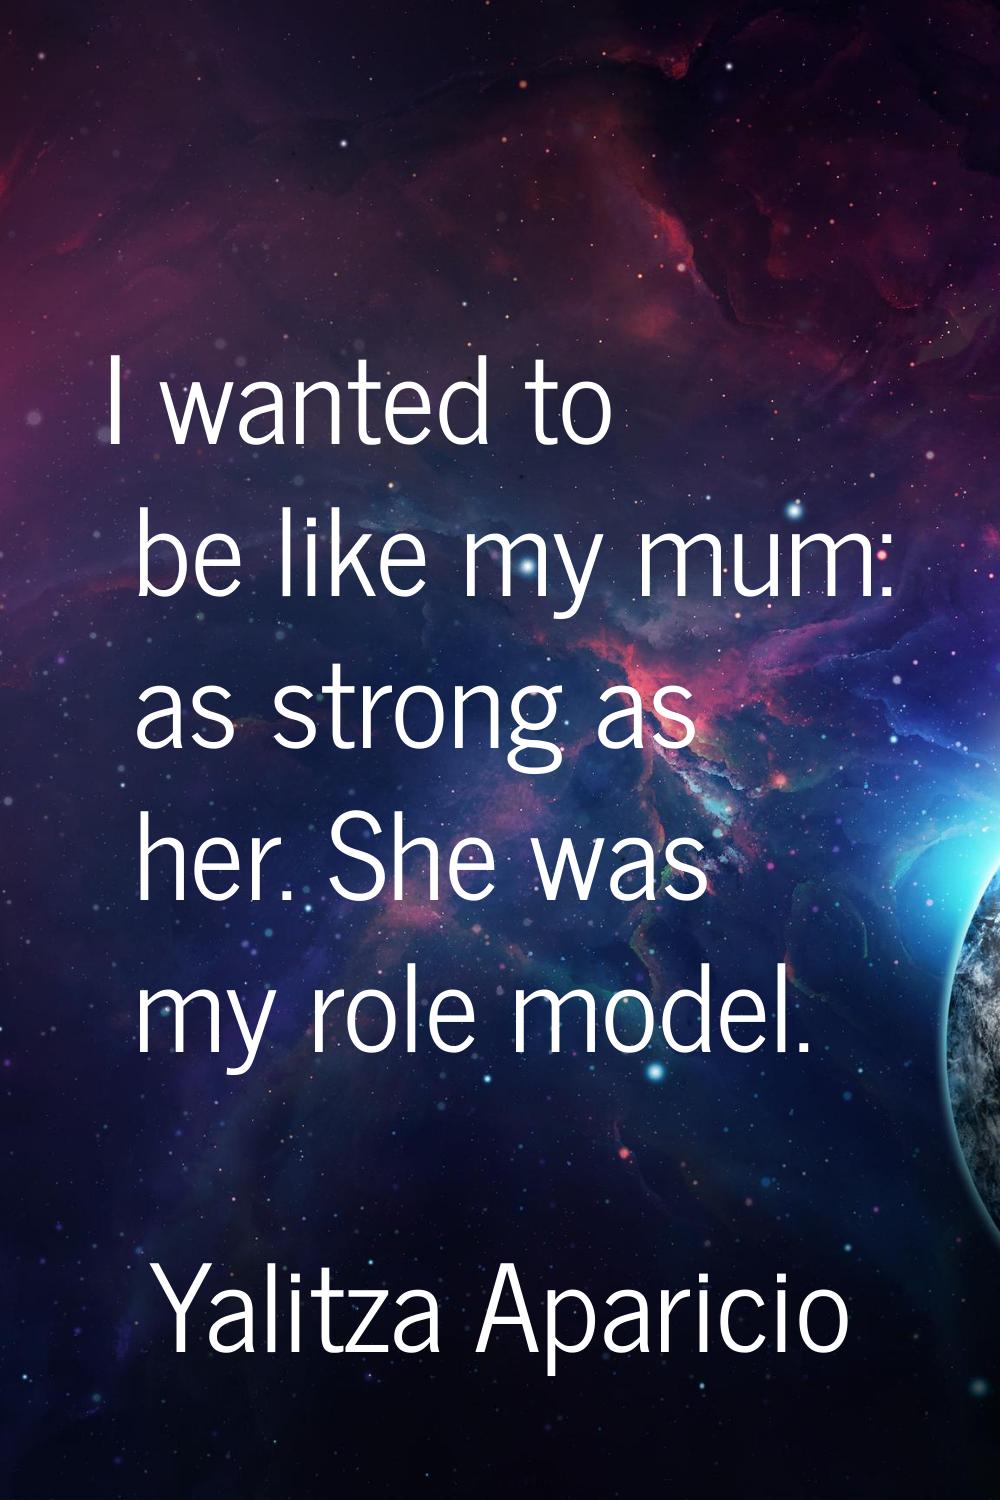 I wanted to be like my mum: as strong as her. She was my role model.